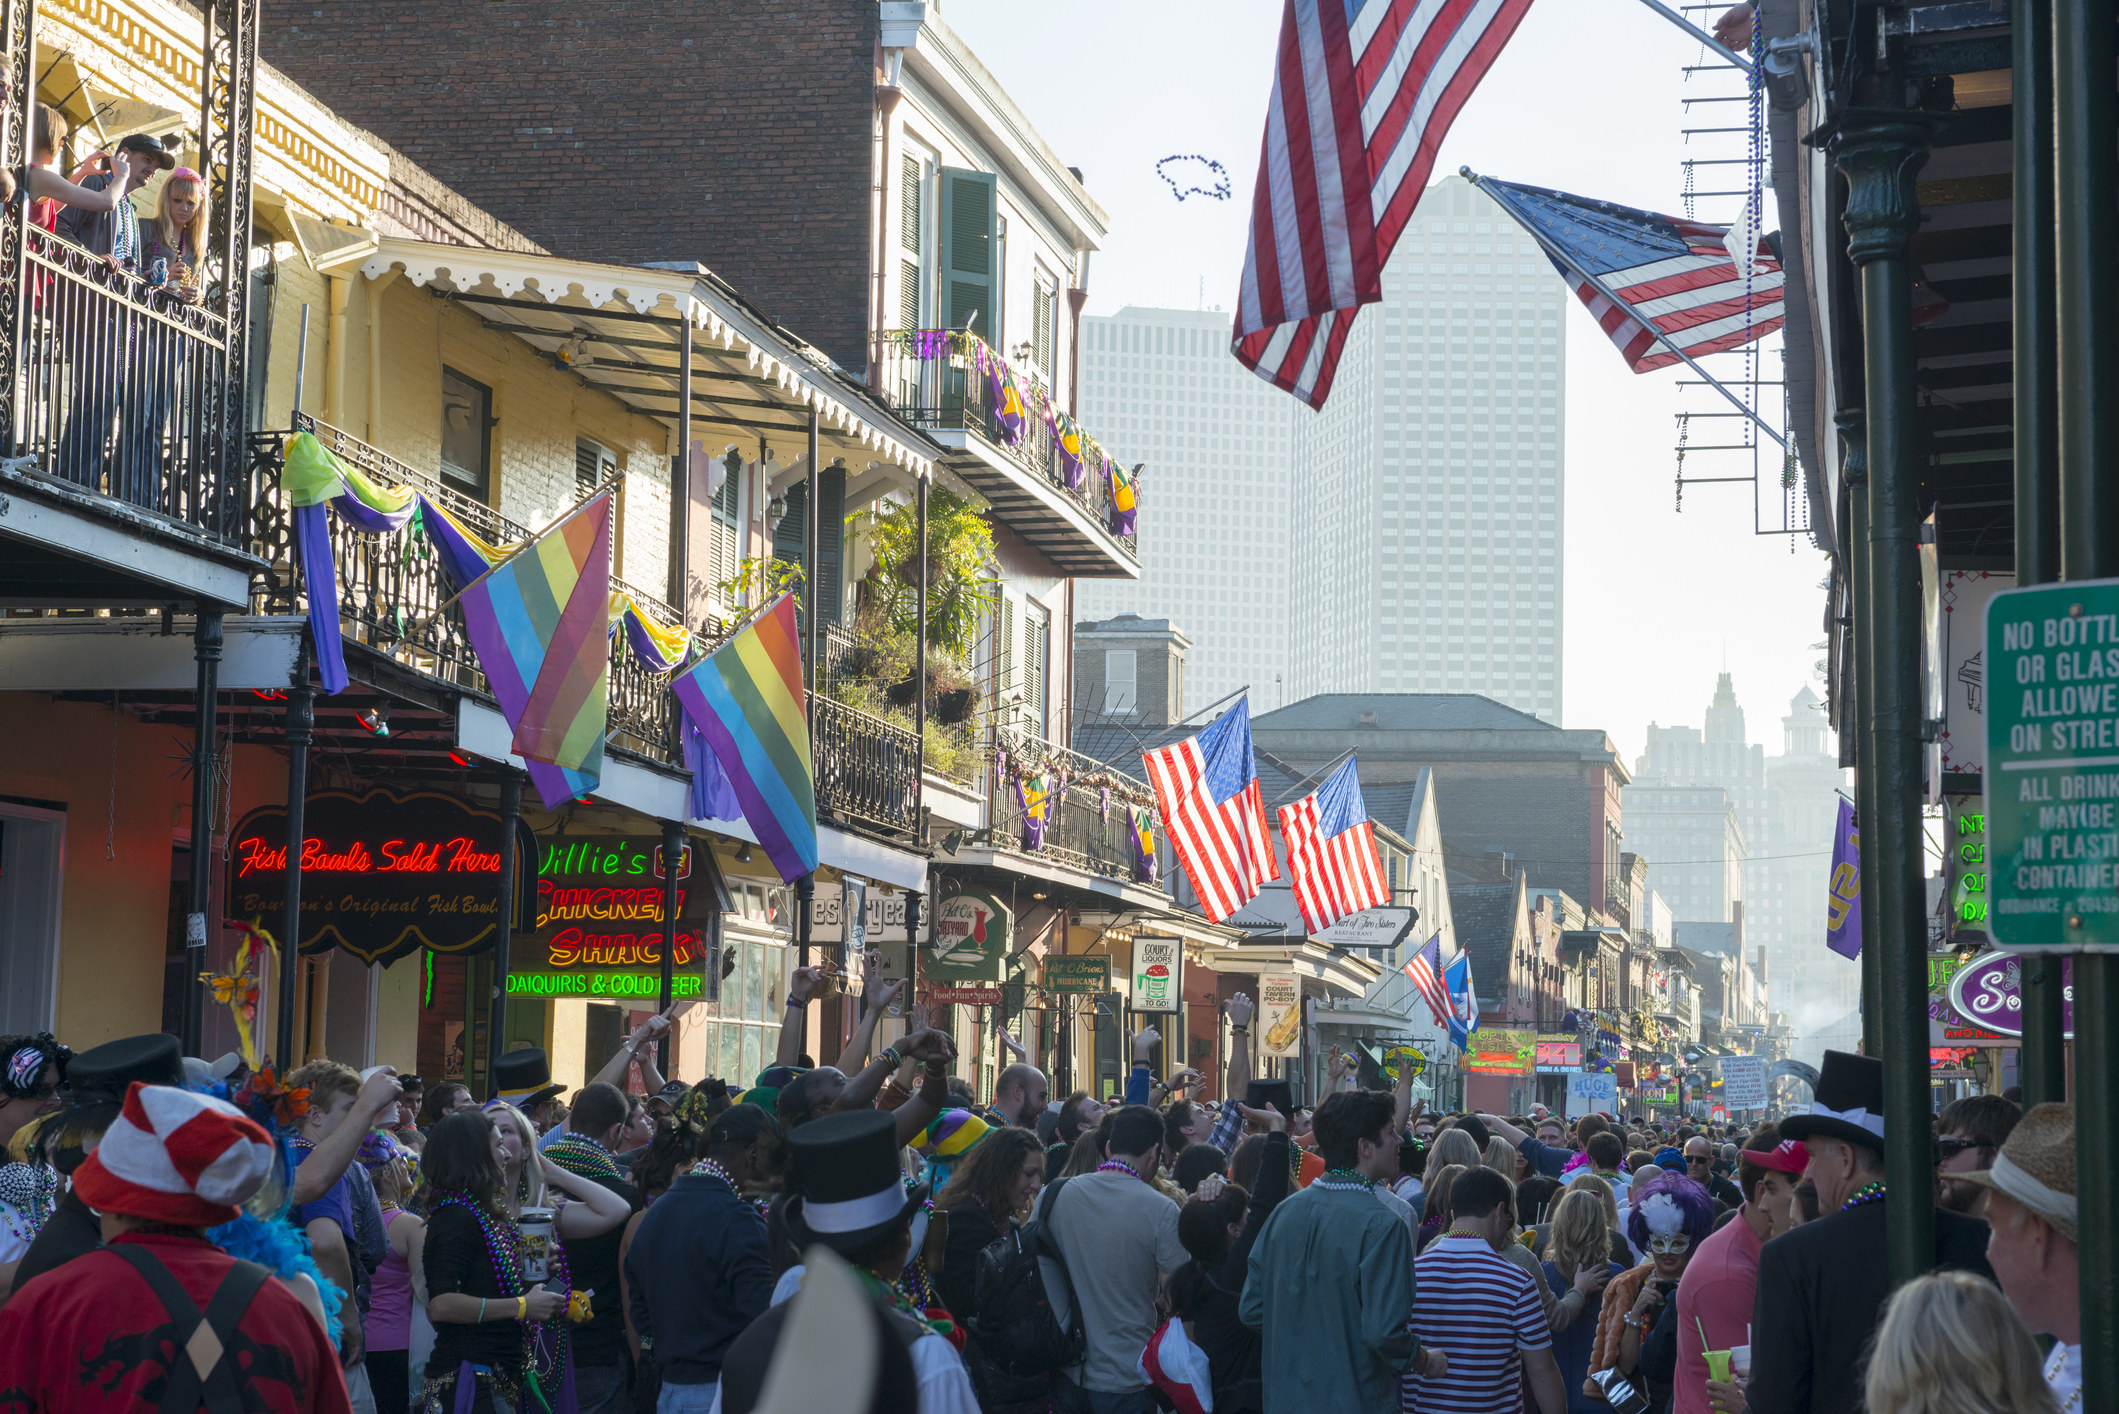 Crowded Bourbon Street in New Orleans for Mardi Gras